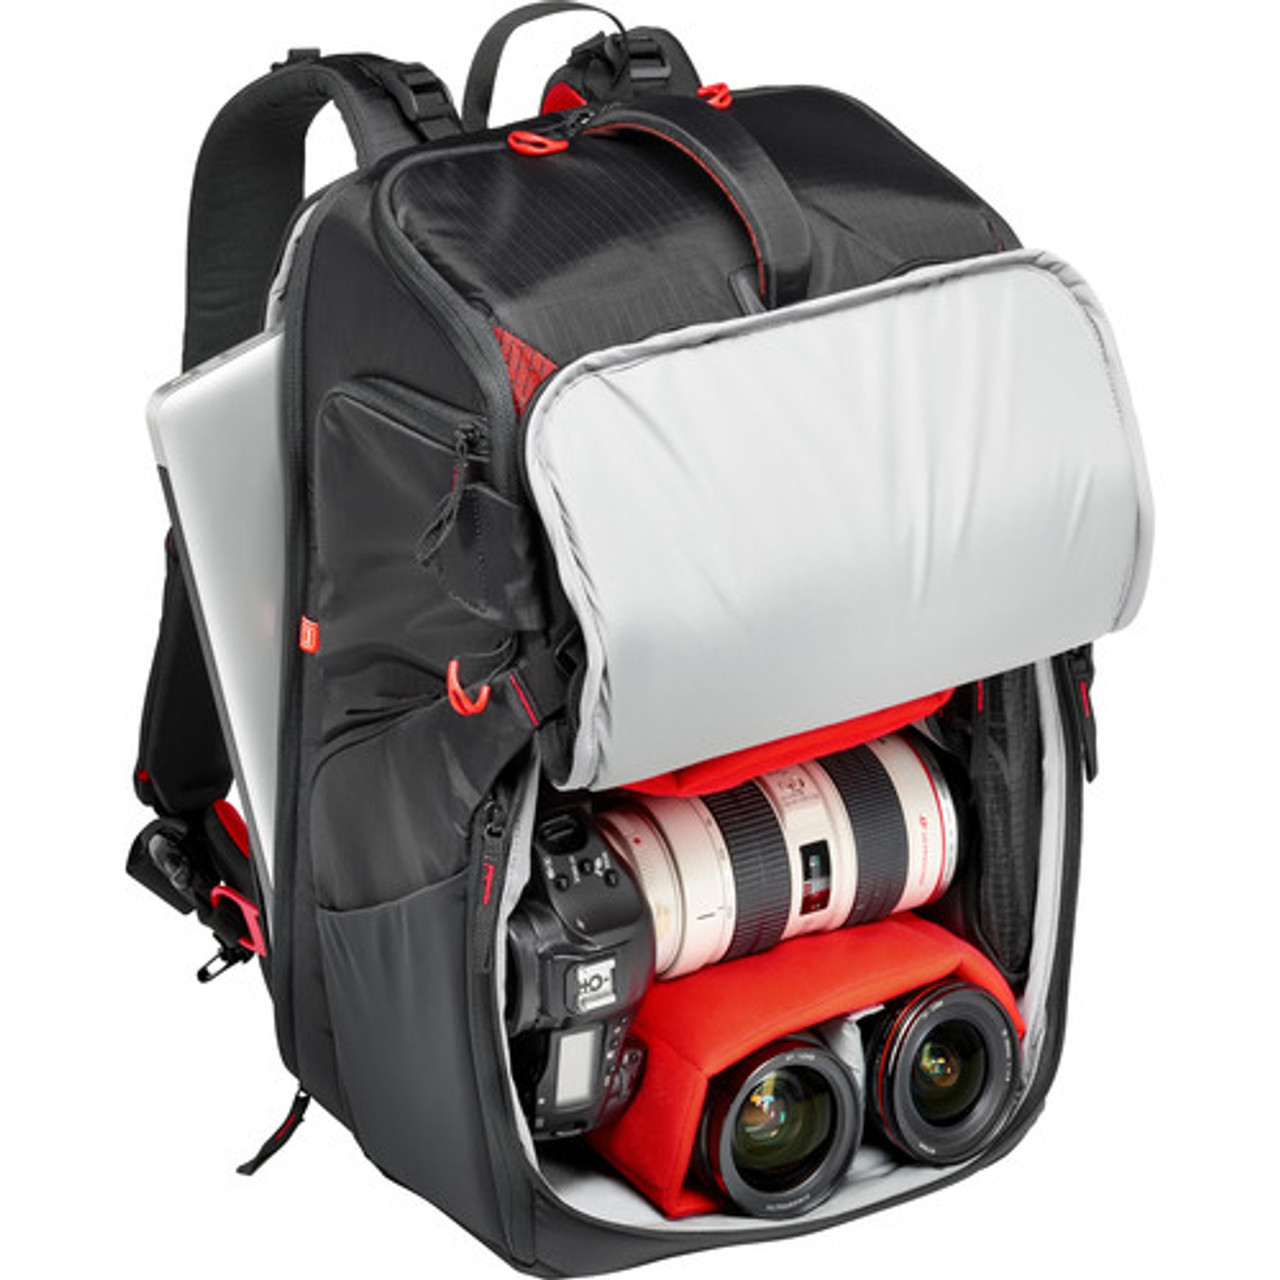 switch like that panic Manfrotto Pro-Light 3N1-36 Camera Backpack (Black) | Bedfords.com